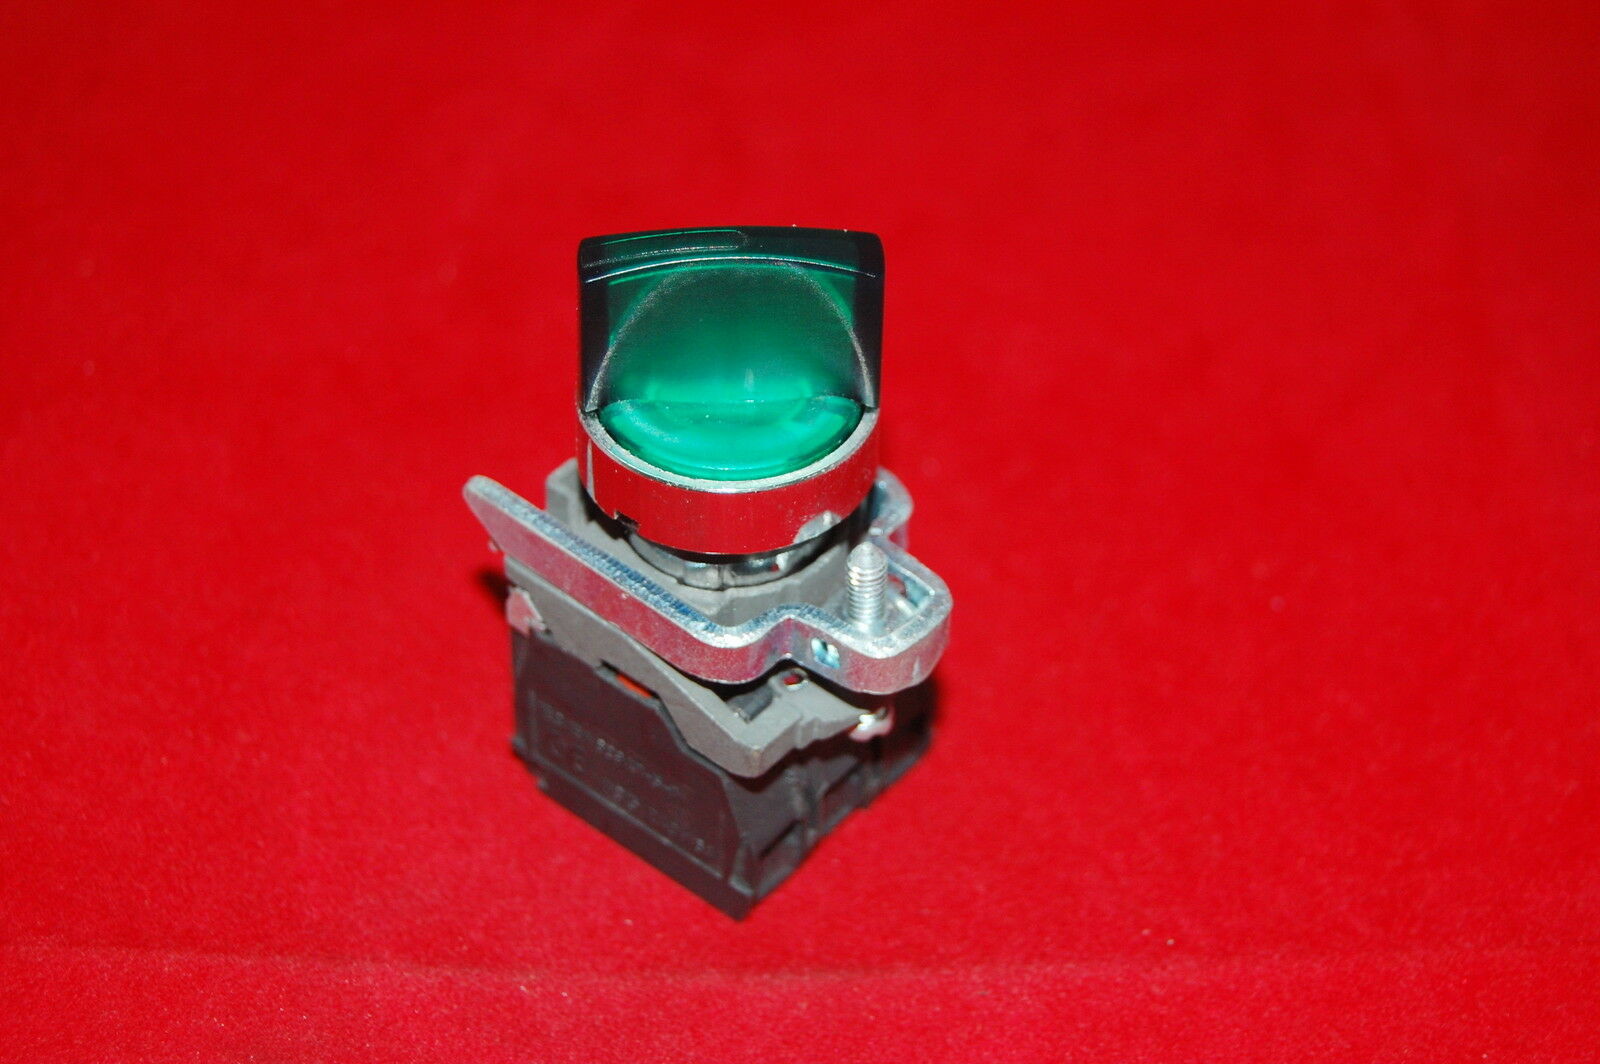 1PC 22mm ILlUMINATED Selector switch 2 Position Fits Green XB4BK123M5 220V LED 